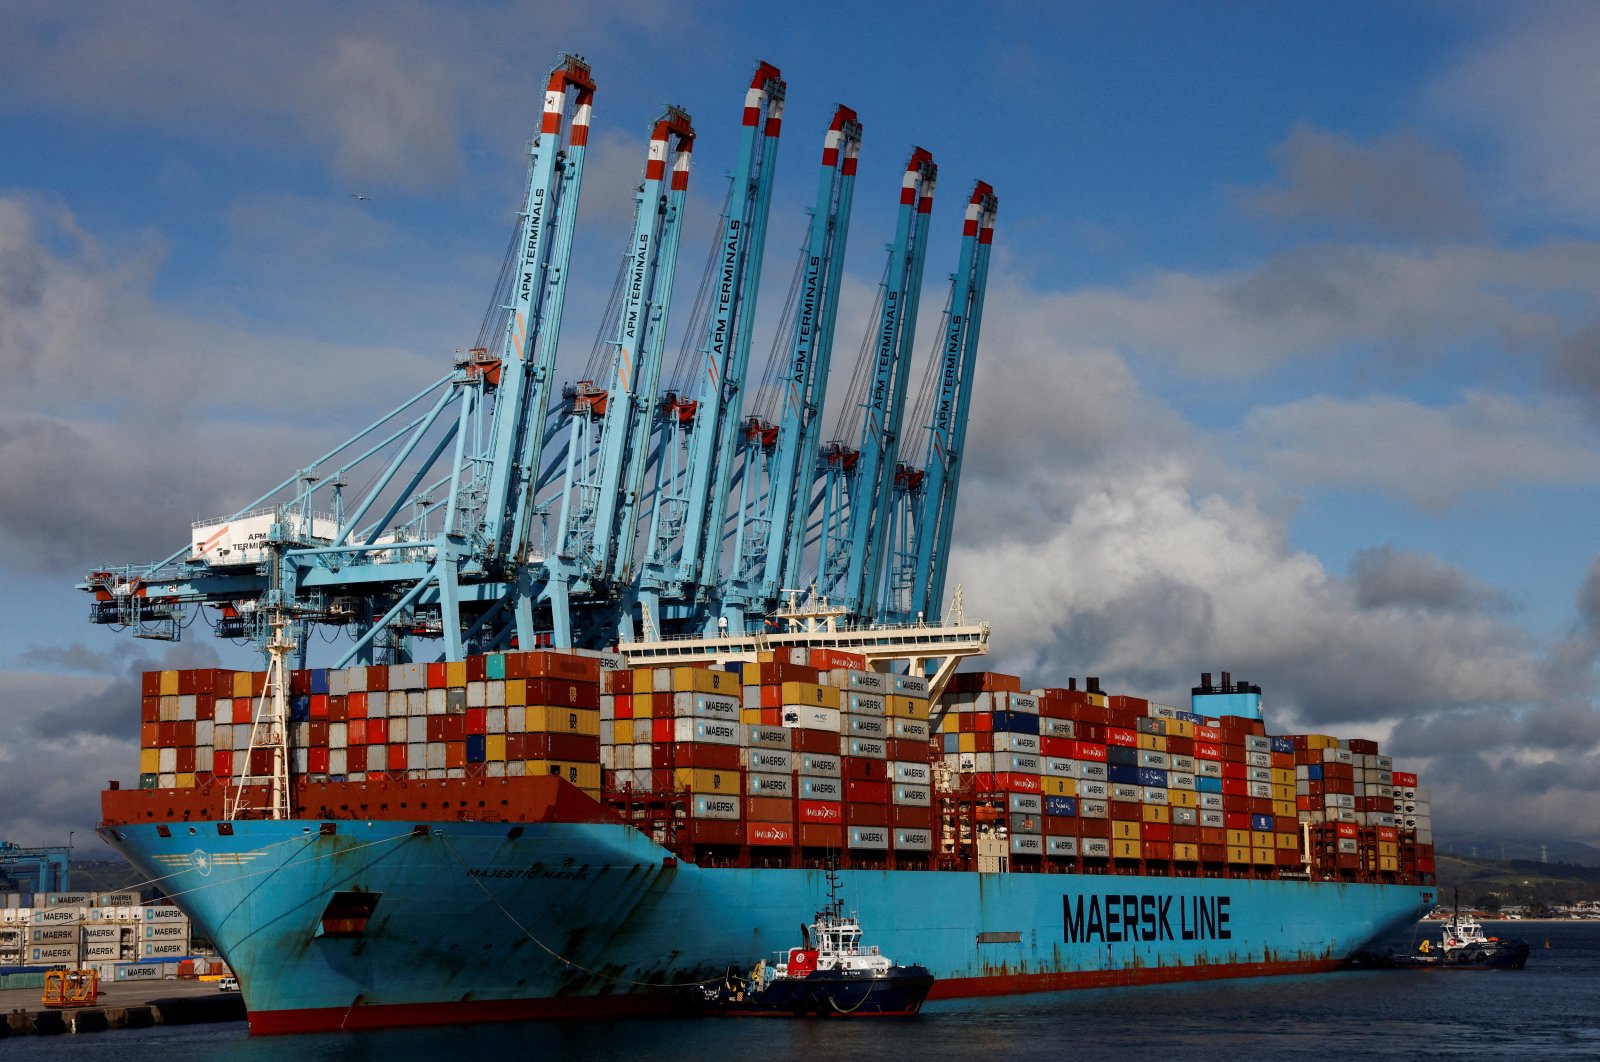 Containers are seen on the Maersk&#039;s Triple-E giant container ship Majestic Maersk, one of the world&#039;s largest container ships, next to cranes at the APM Terminals in the port of Algeciras, Spain, Jan. 20, 2023. (Reuters Photo)